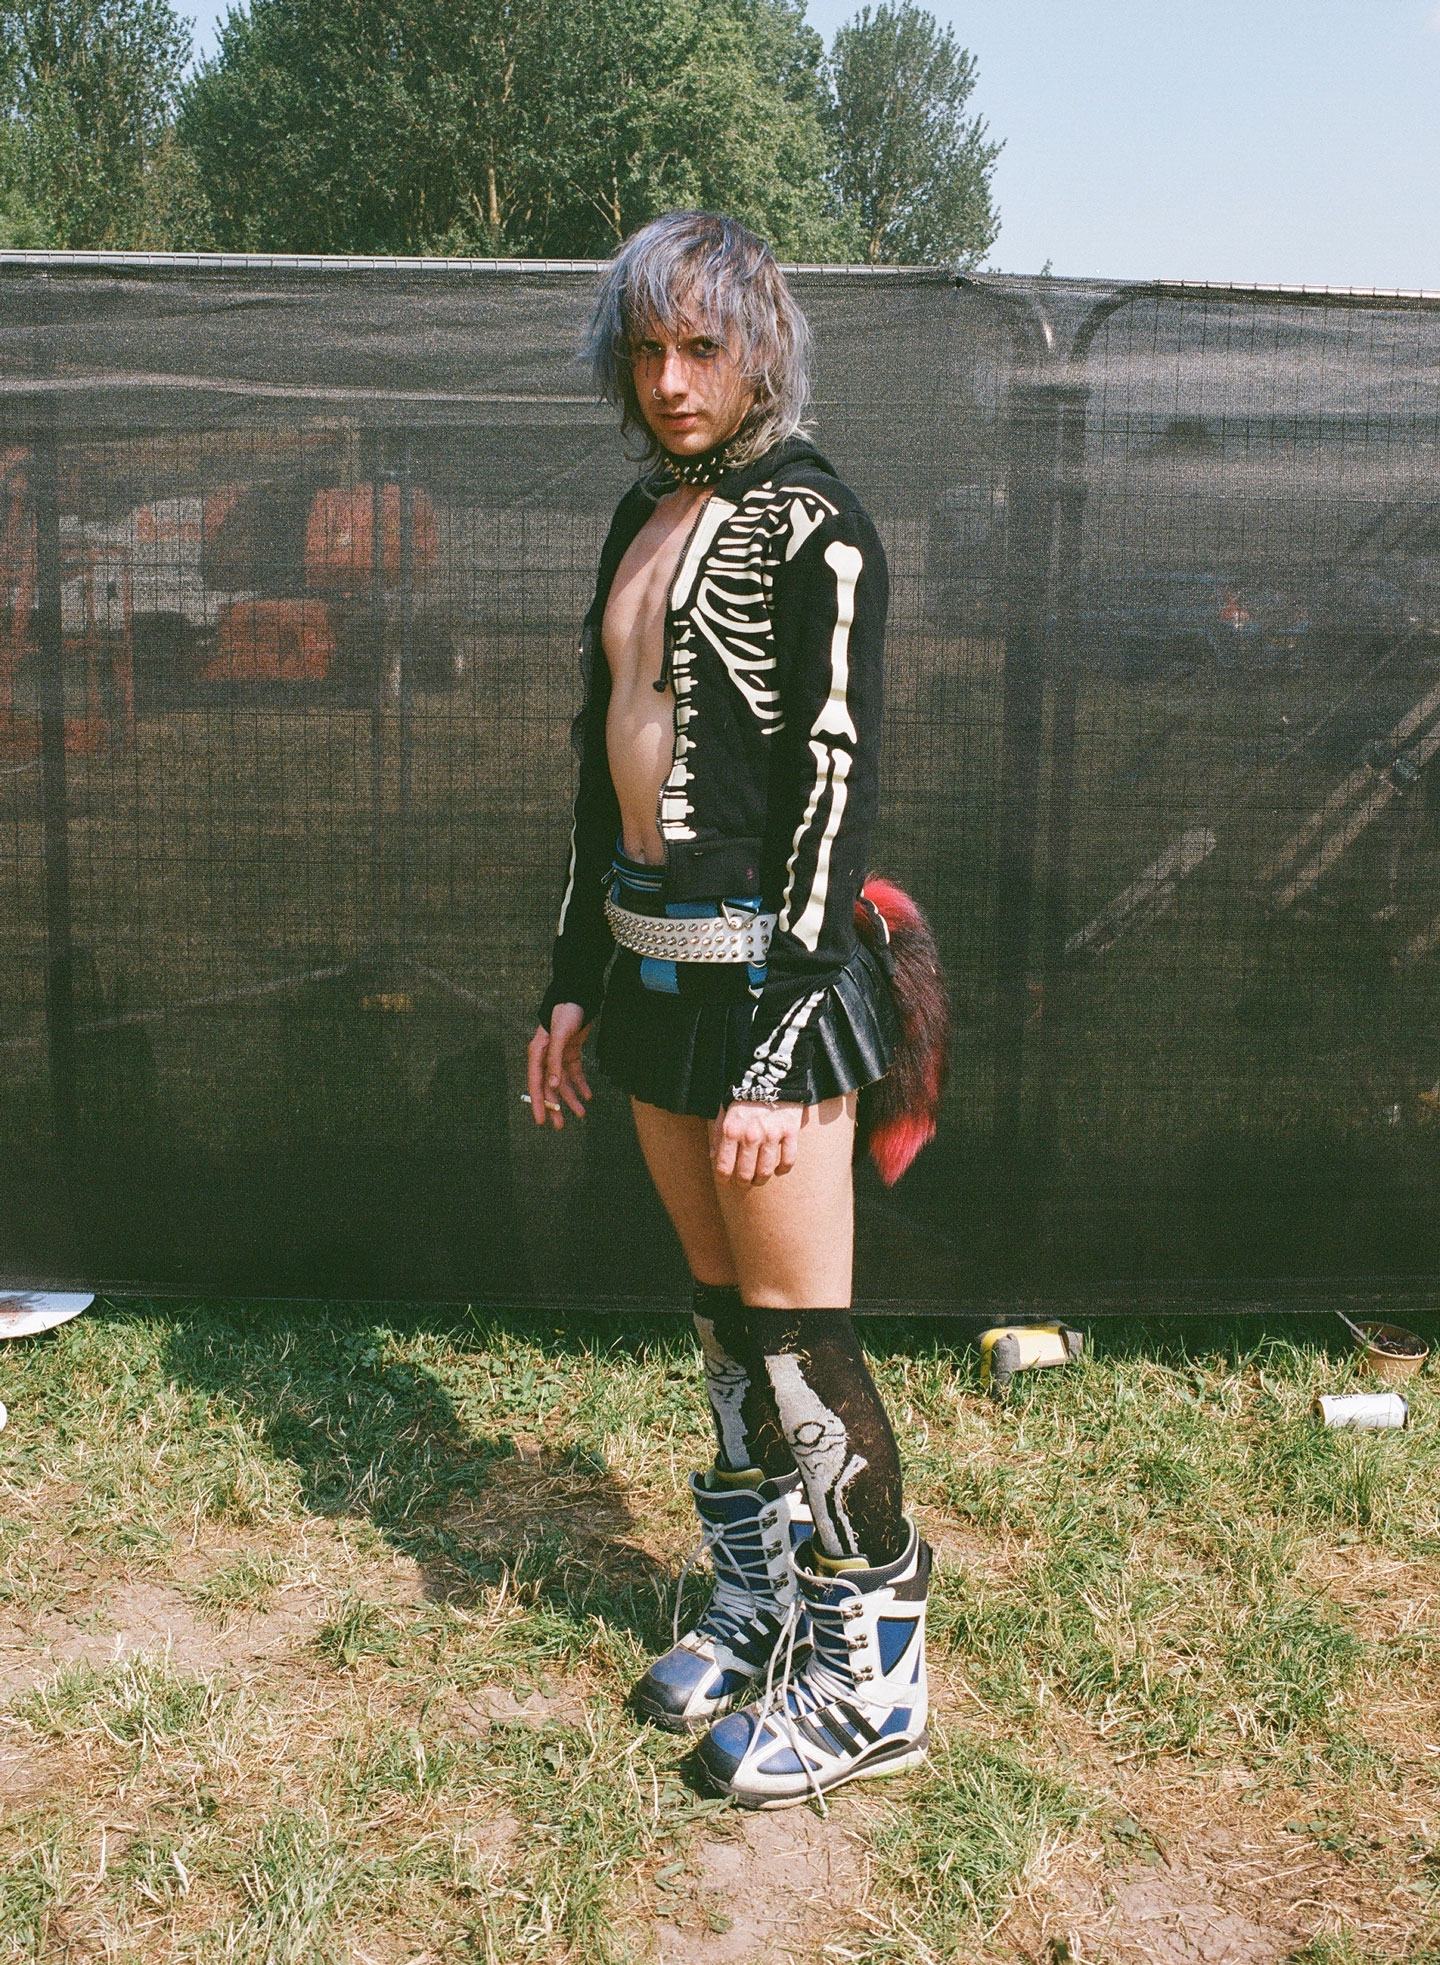 a blue-haired festival-goer wears an open skeleton tee with a short leather skirt and a red tail; they hold a cigarette in one hand